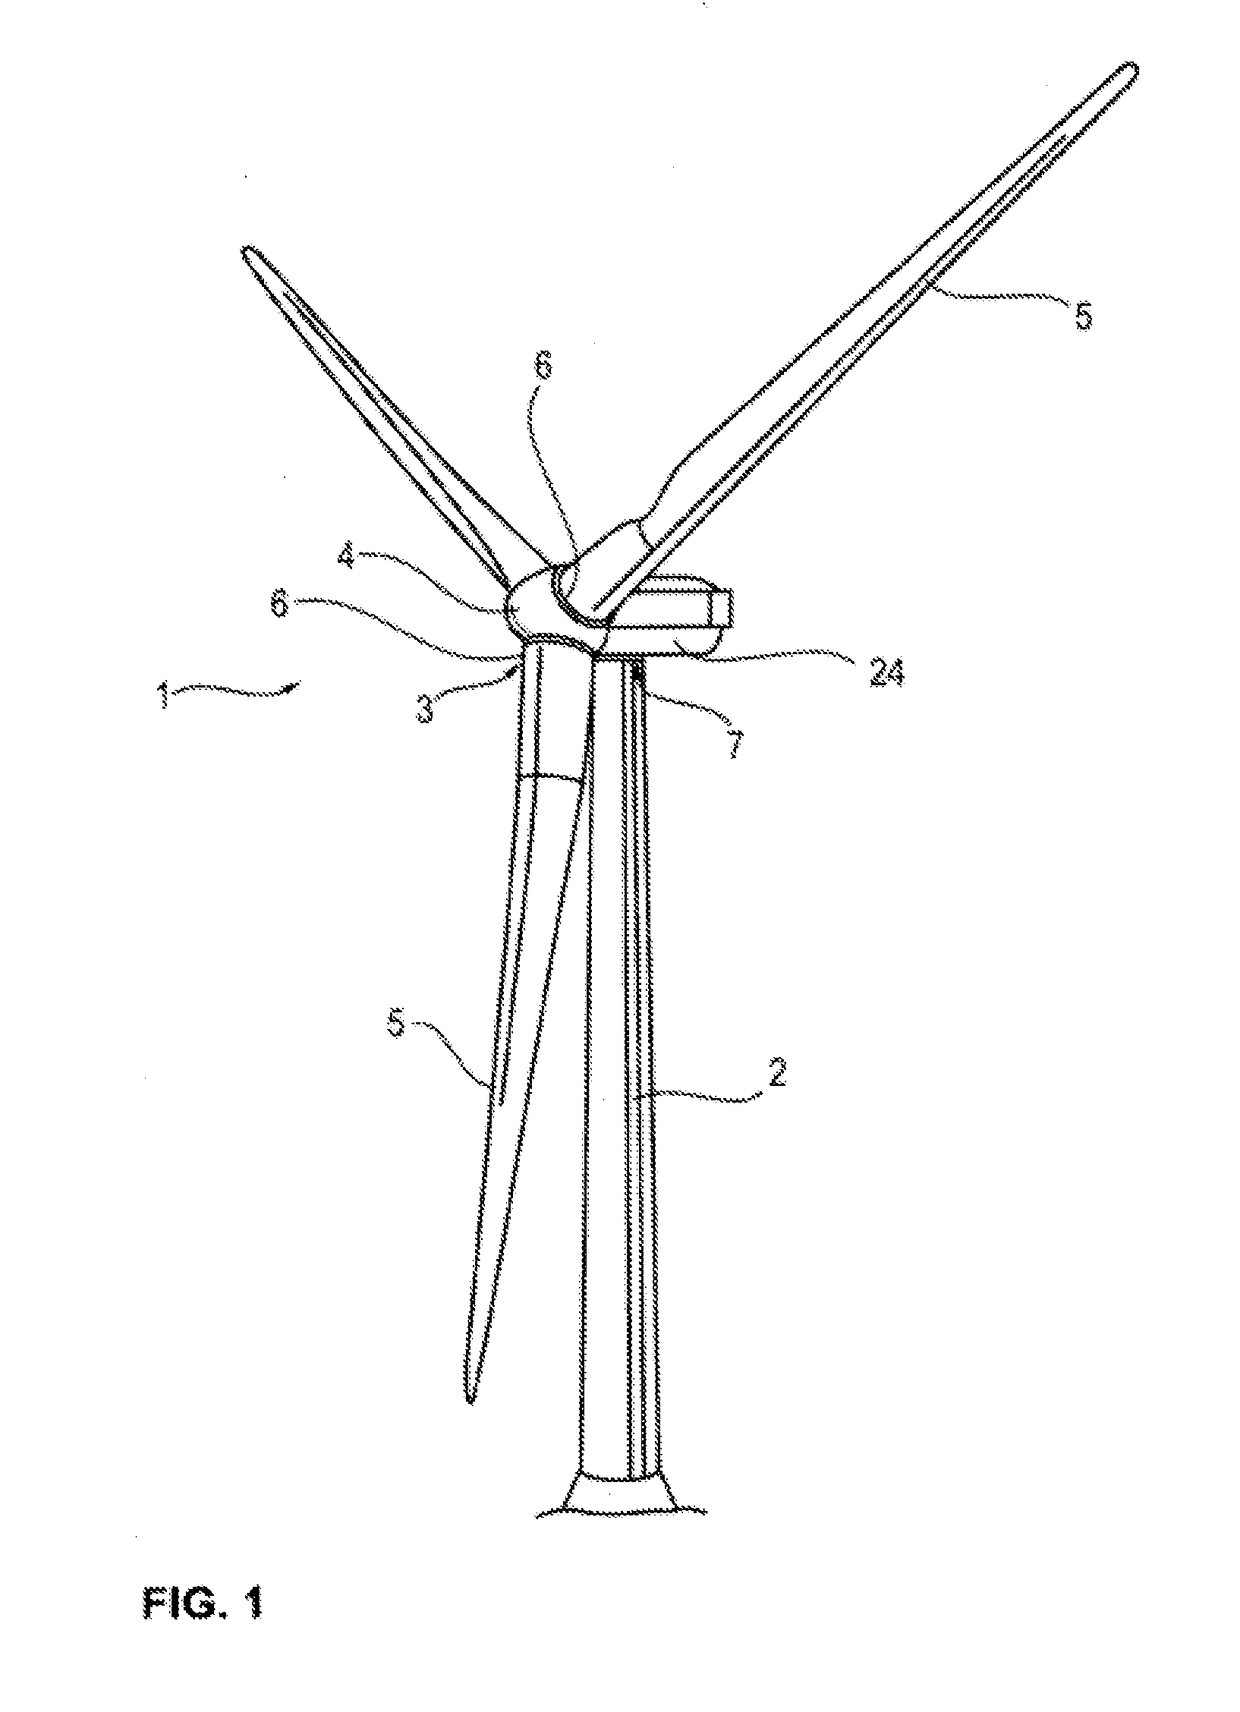 Adjustment and/or drive unit, wind power plant having such an adjustment and/or drive unit, and method for controlling such an adjustment and/or drive unit